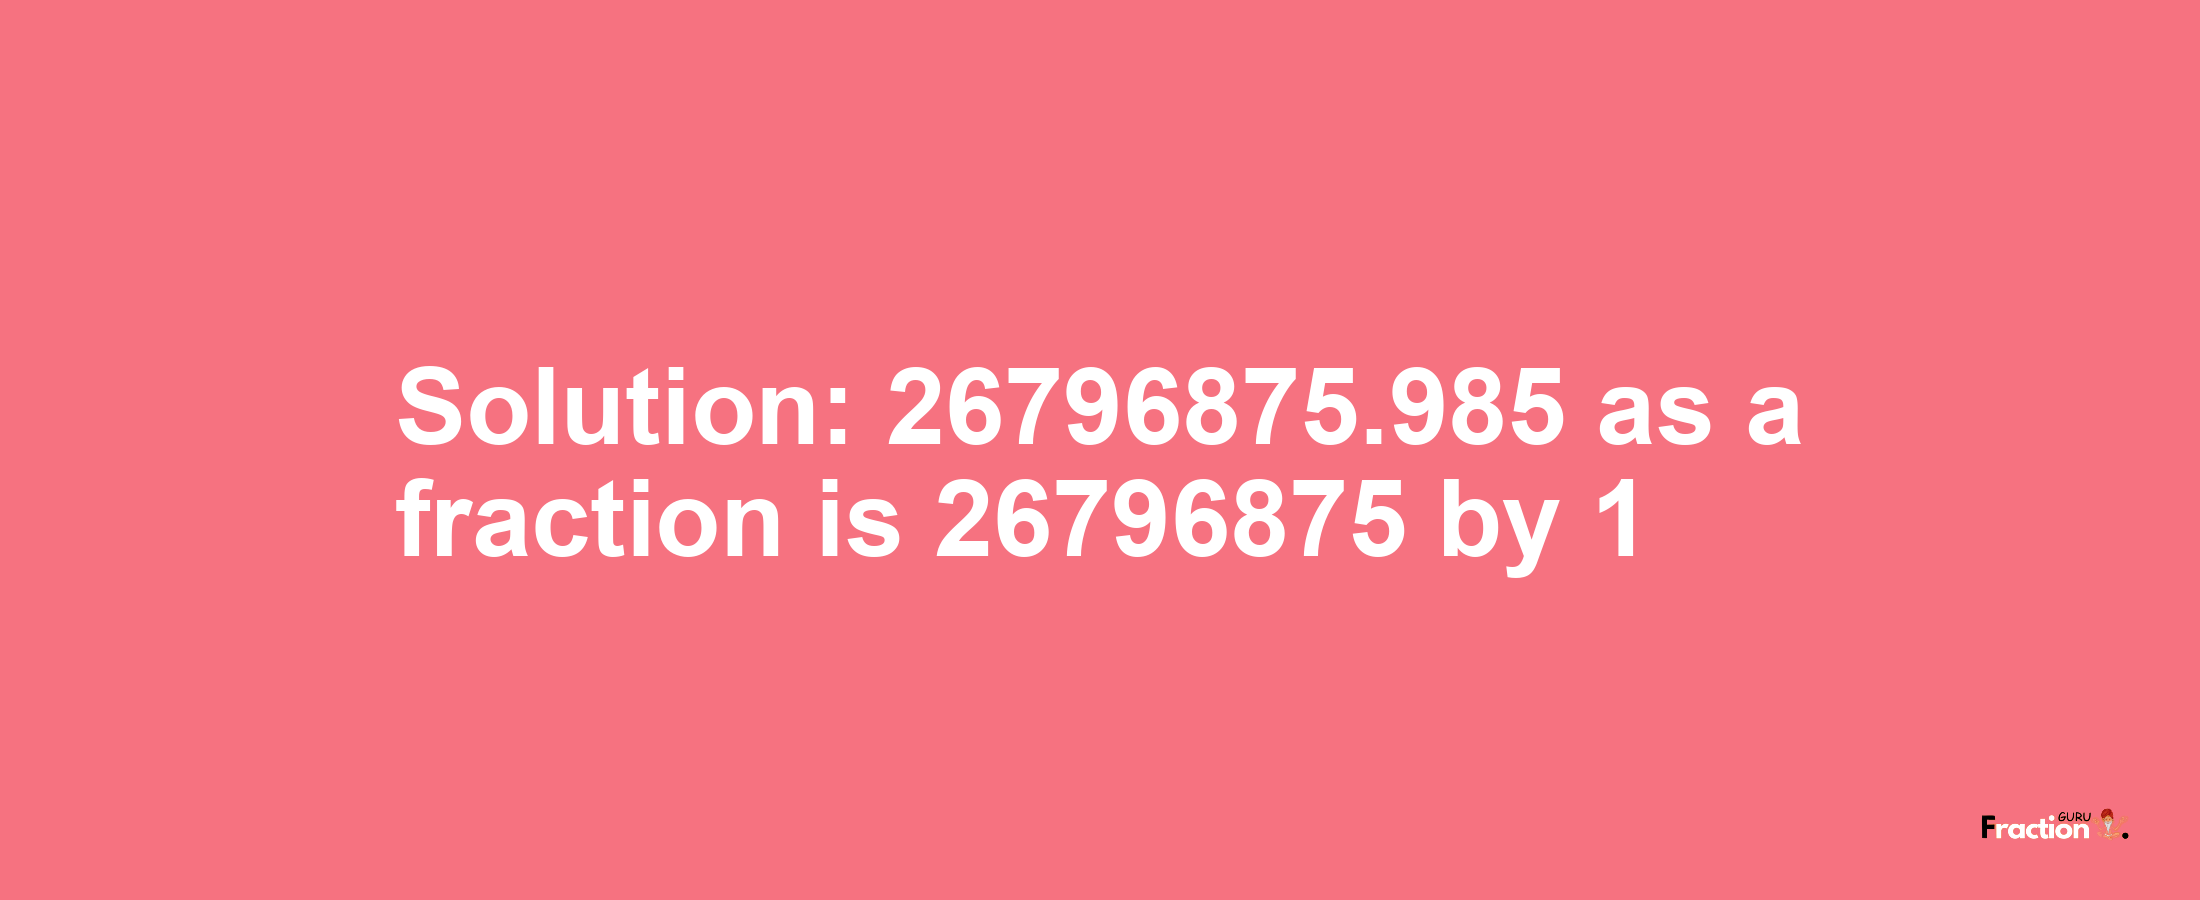 Solution:26796875.985 as a fraction is 26796875/1